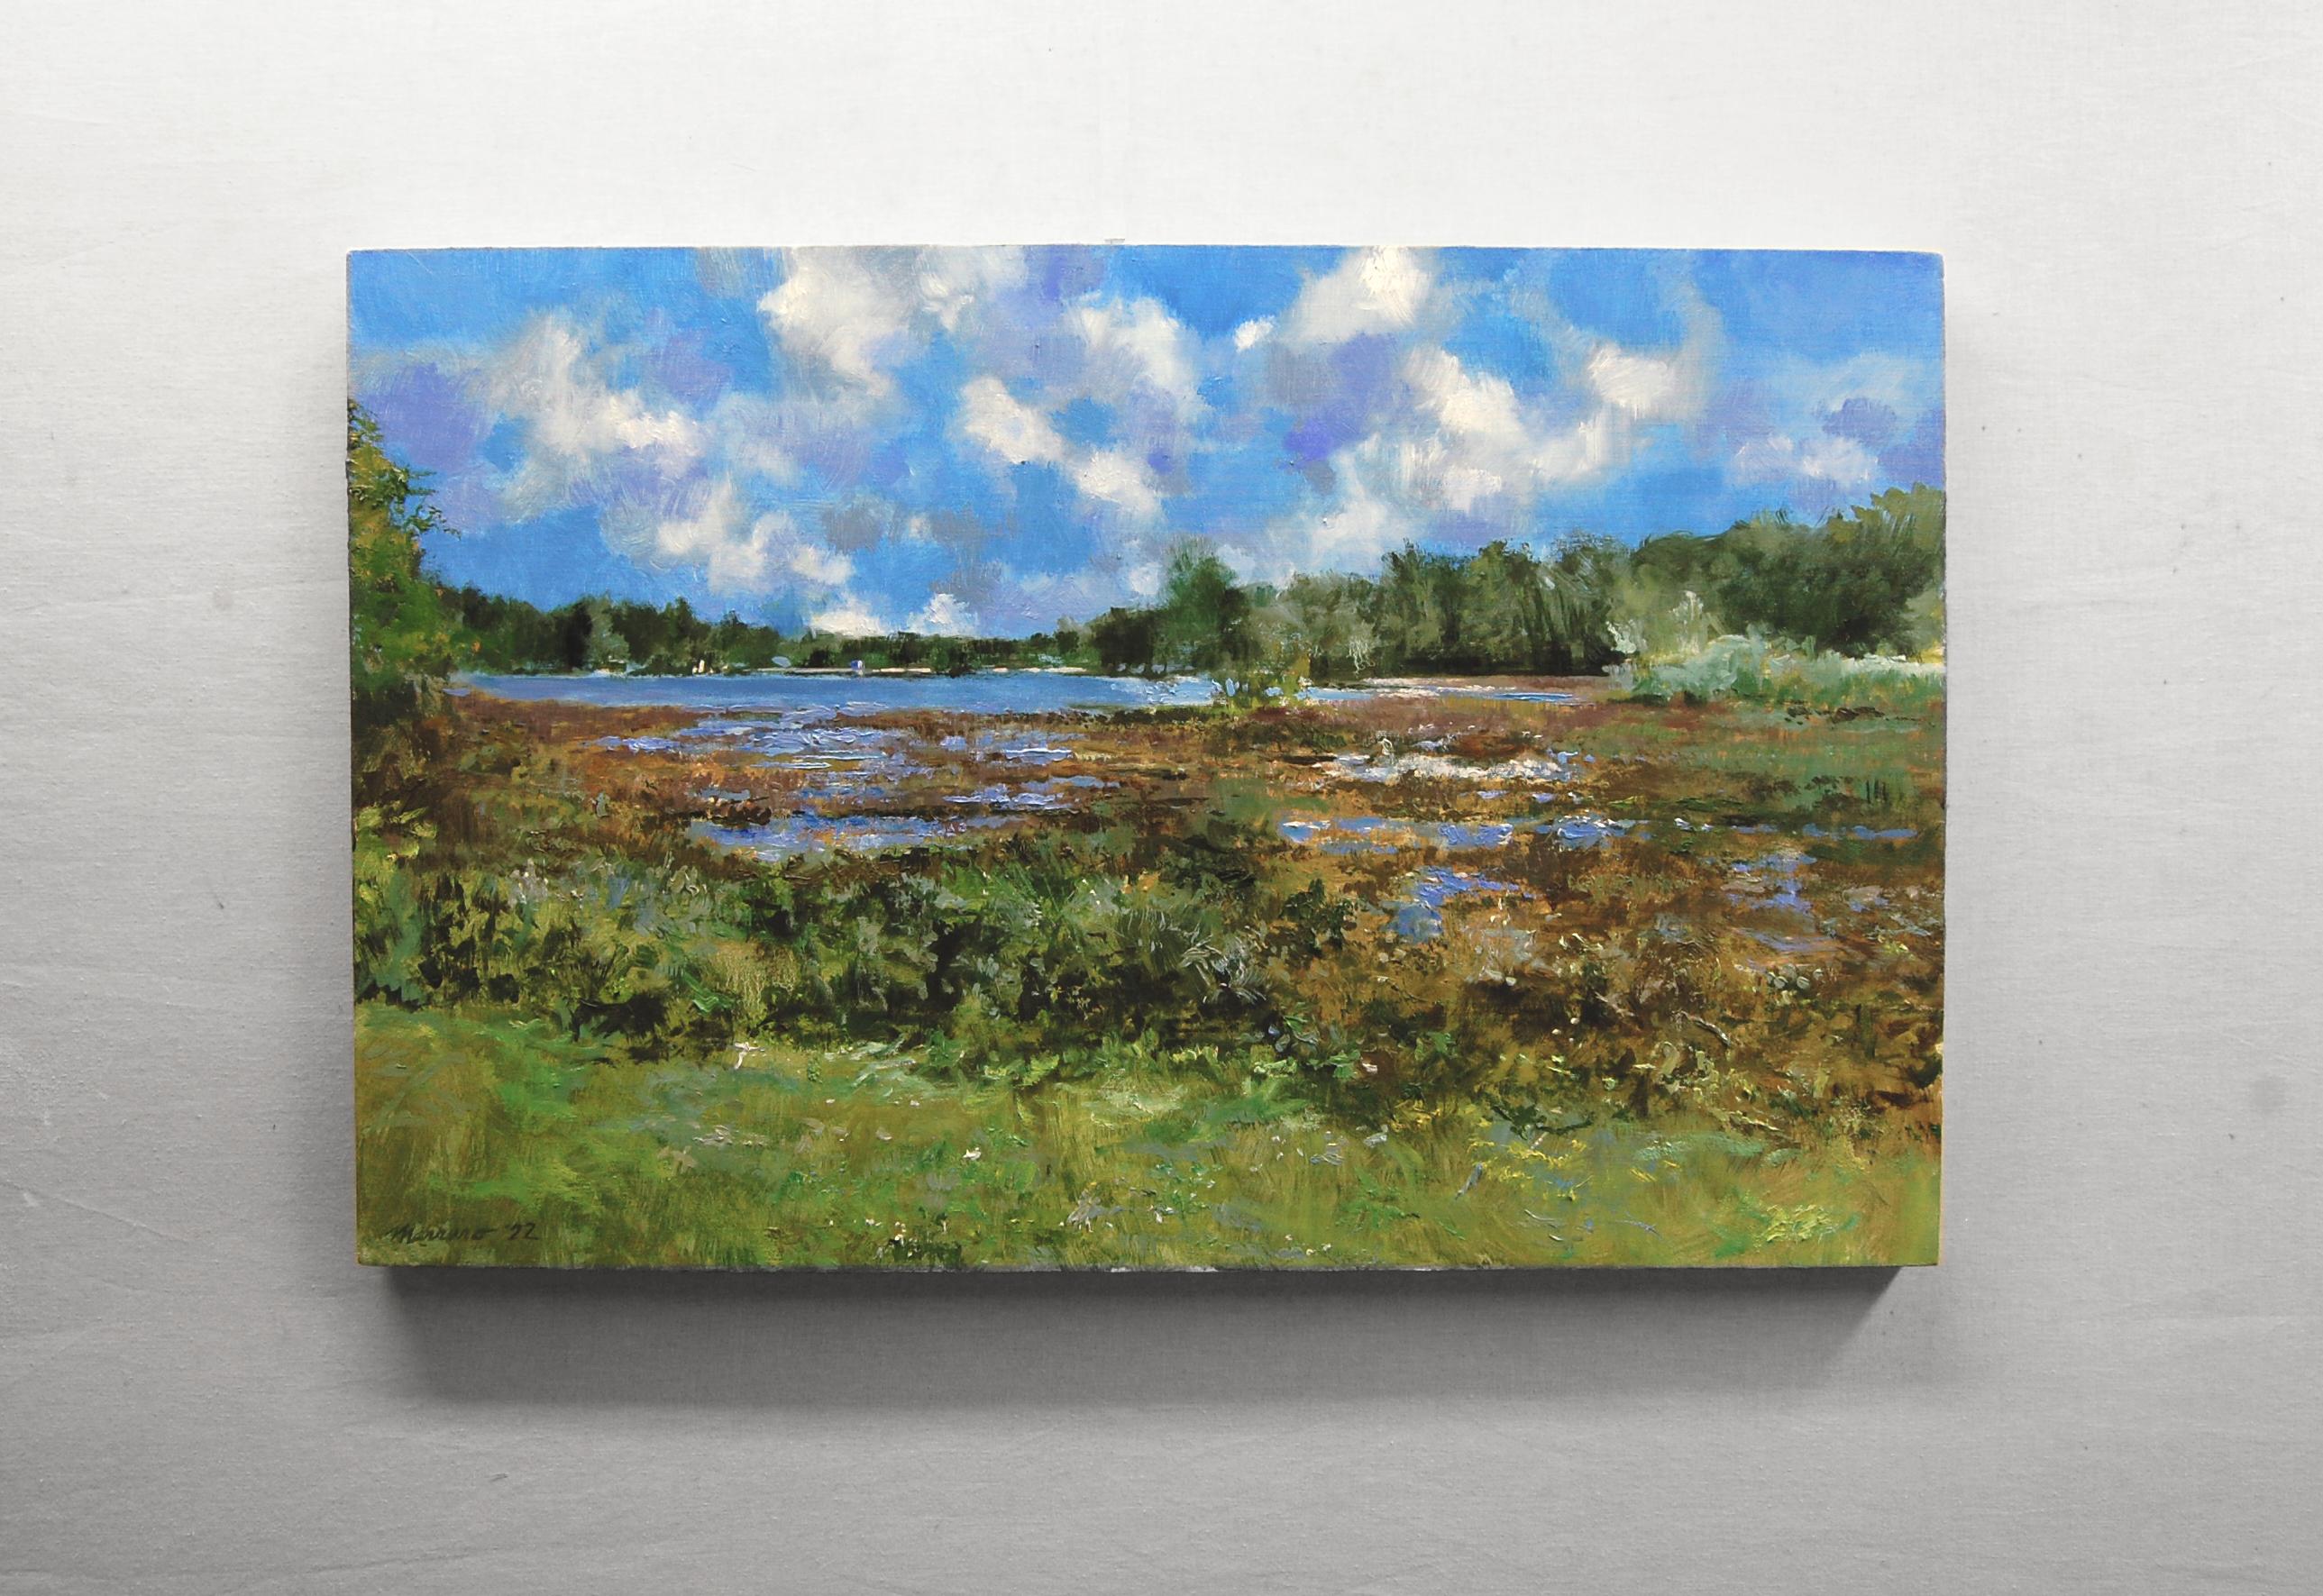 <p>Artist Comments<br>Artist Onelio Marrero features a sunny marshland on an early autumn morning. He executes the composition from sketches and memory based on a swamp near his home. The powerful strokes, colors, and textures capture the effects of